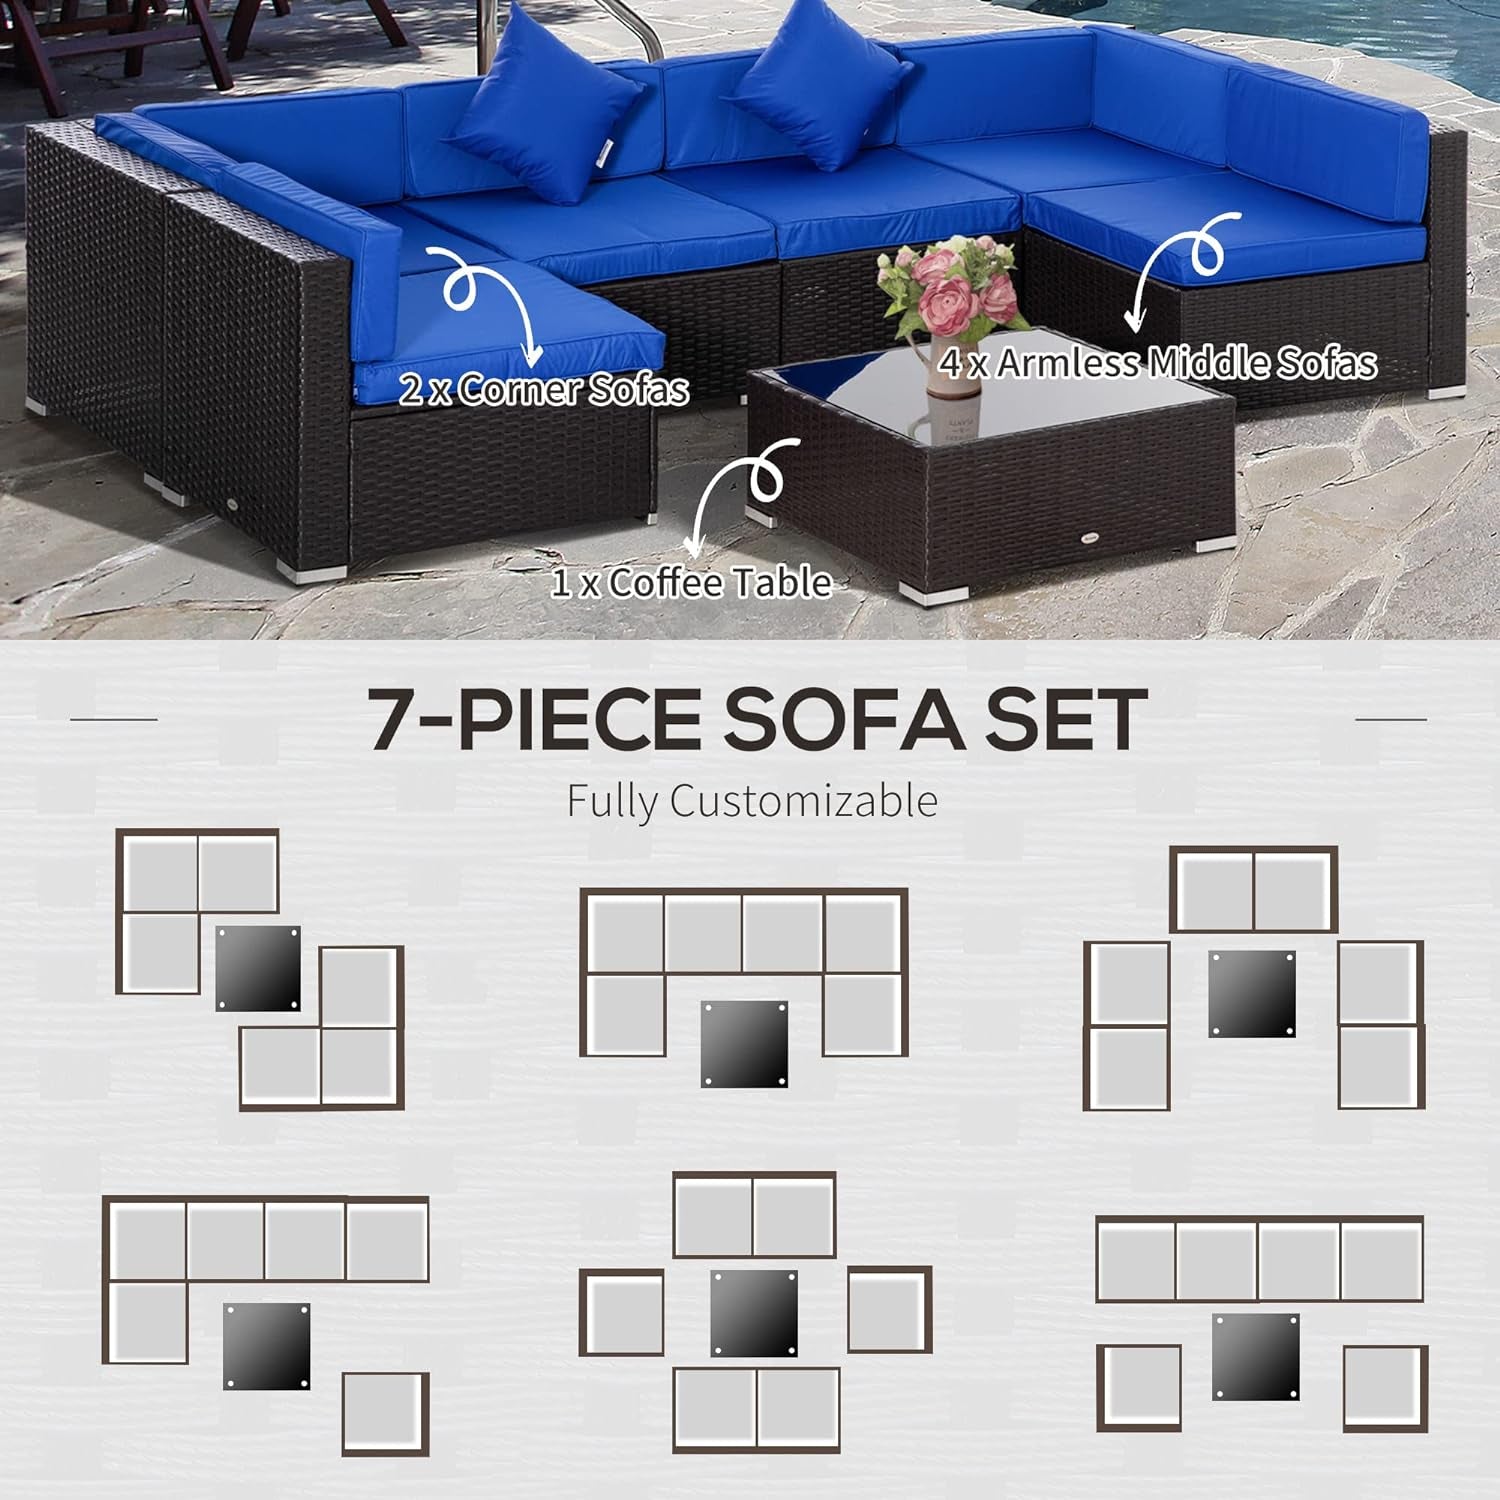 7 Piece Patio Furniture Set, PE Rattan Outdoor Conversation Set with Sectional Sofa, Glass Tabletop, Cushions and Pillows for Garden, Lawn, Deck, Dark Brown and Blue